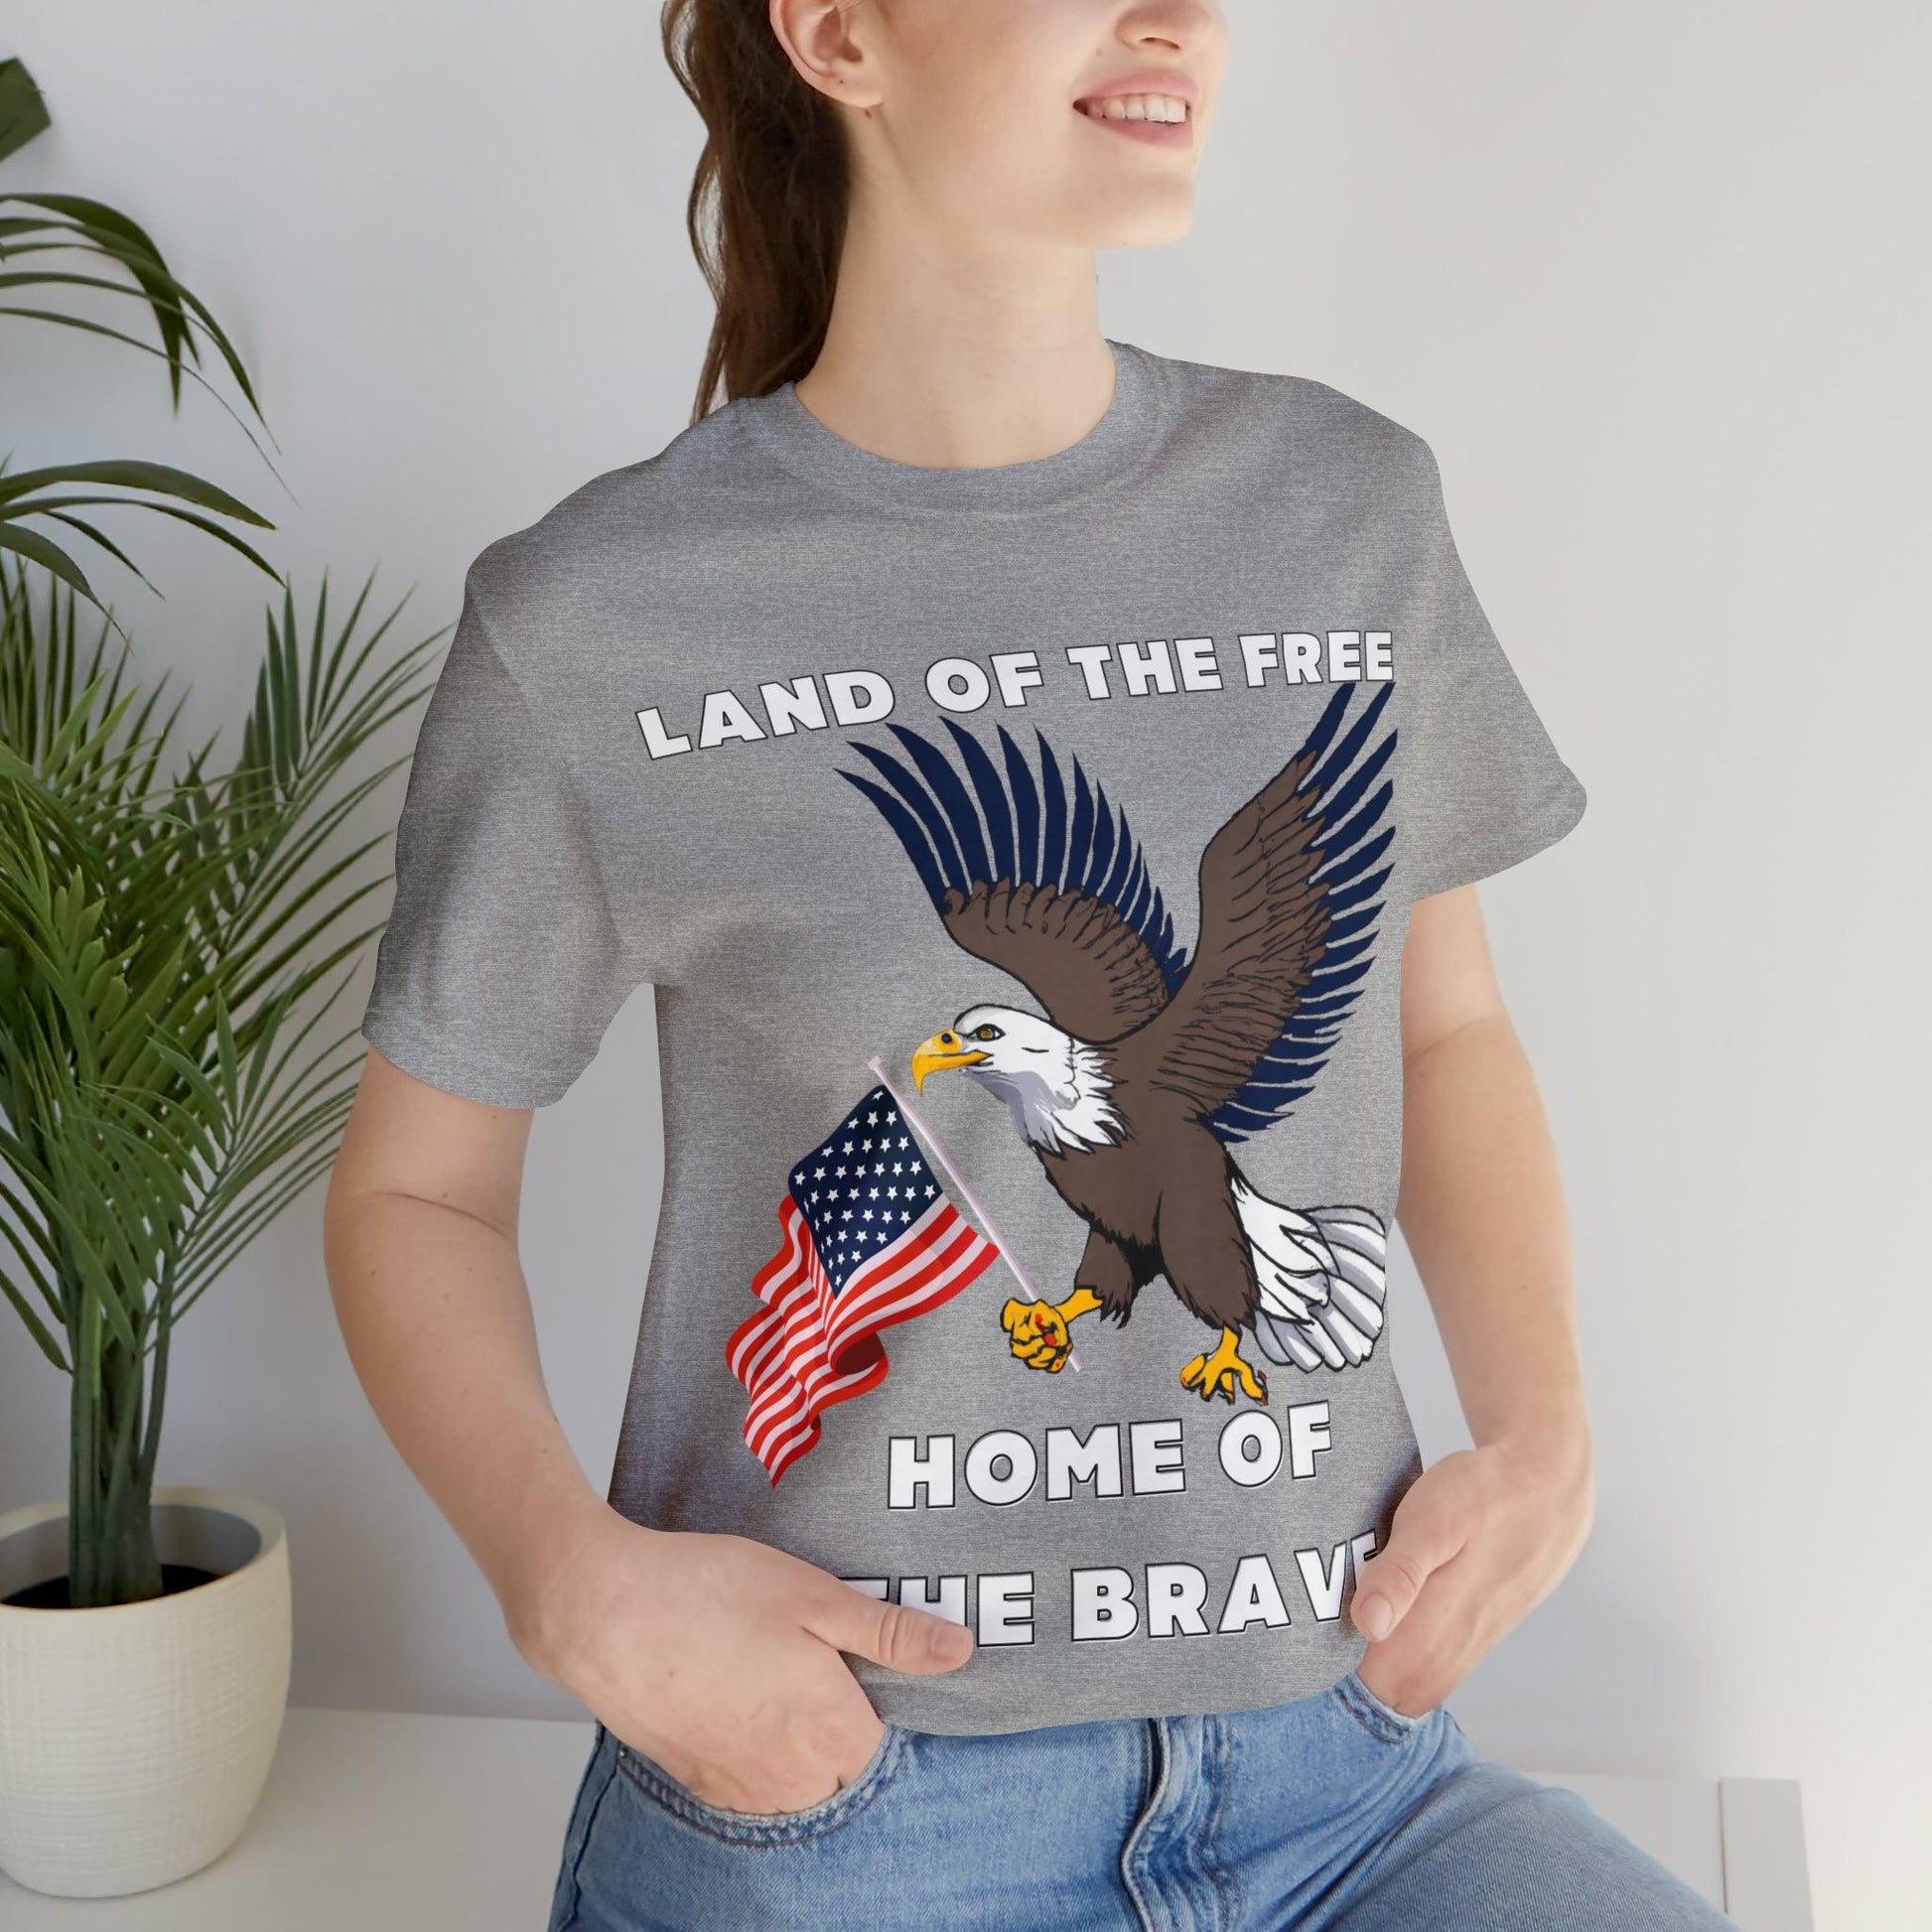 Celebrate Independence Day with Patriotic Shirts: Land of the free, Home of the Brave Shirt for Women and Men - Giftsmojo